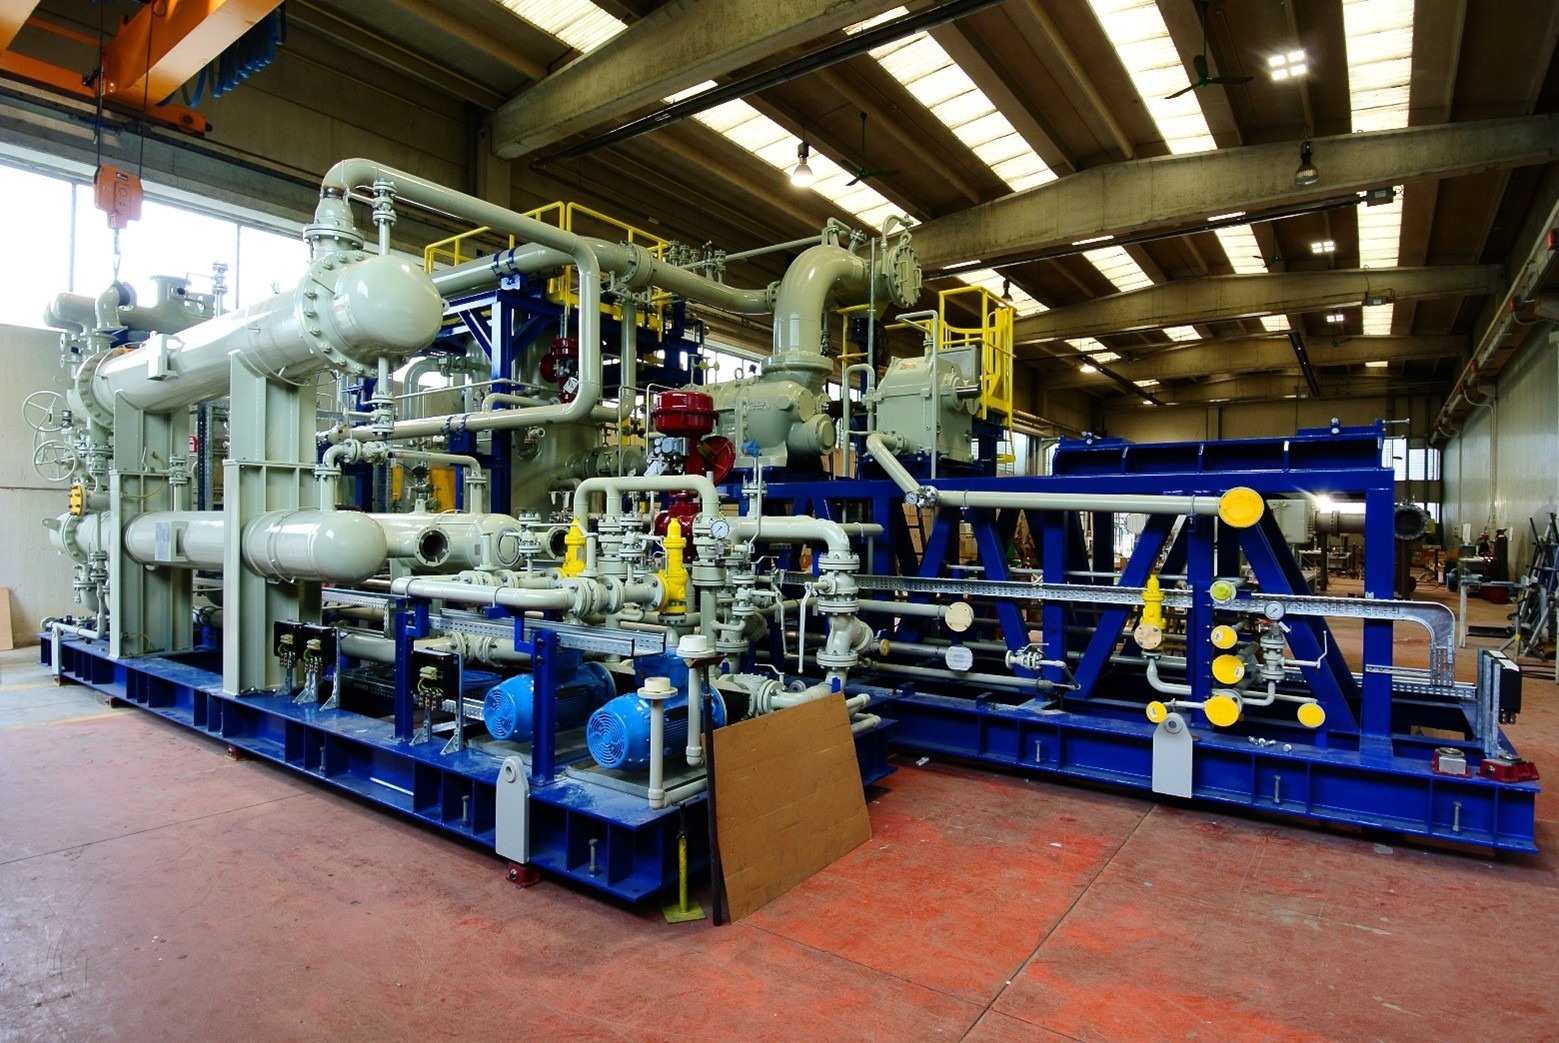 Clauger-Technofrigo tail gas compression packages with oil-flooded, single-stage screw compressors.